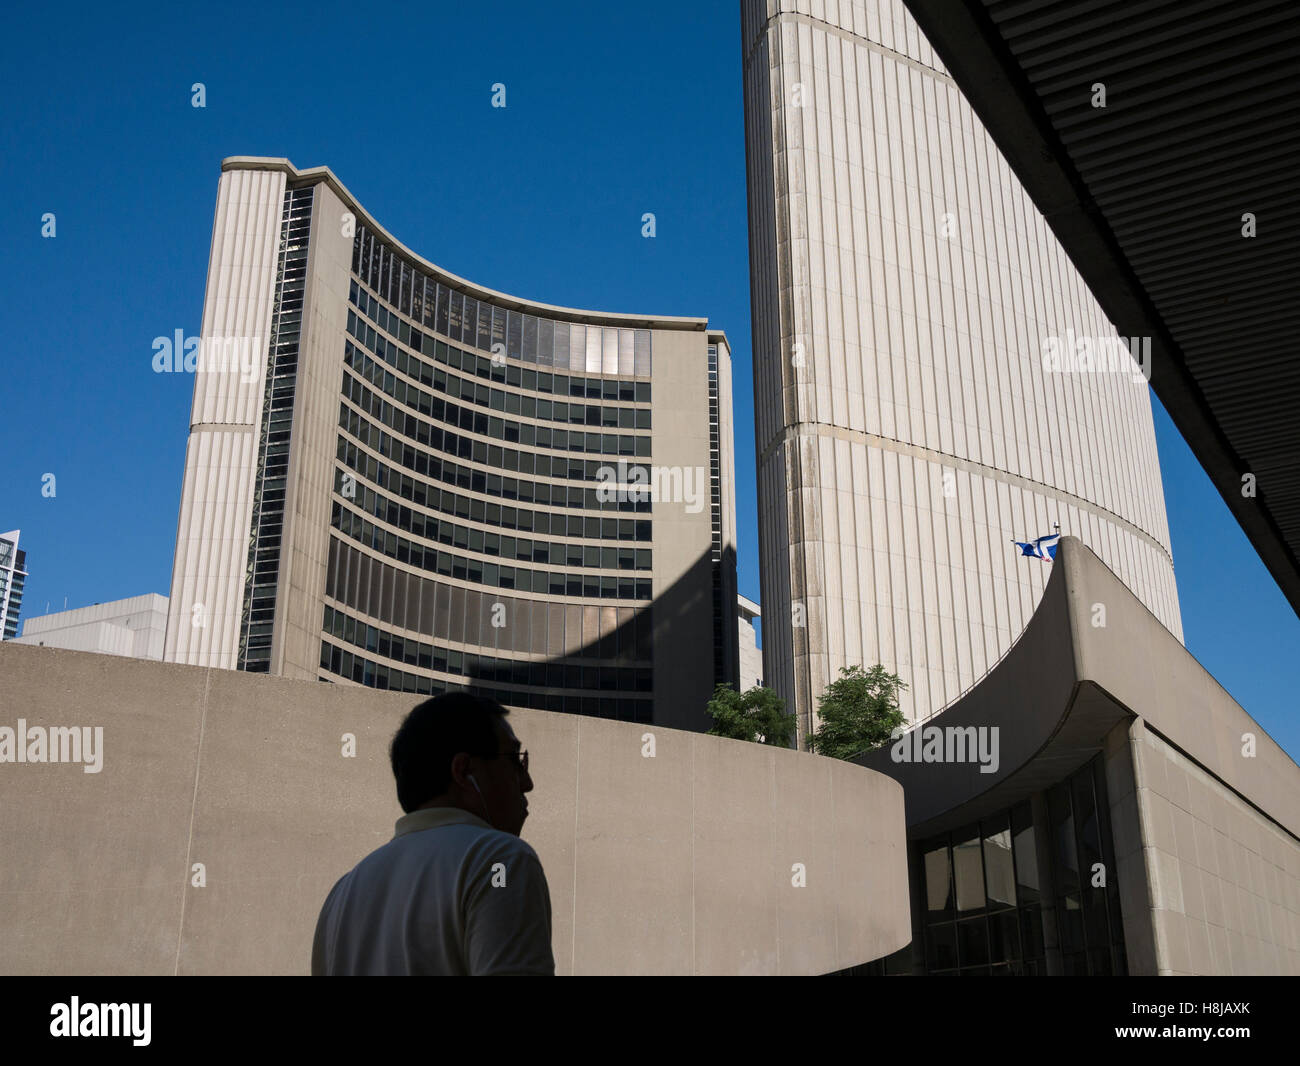 The Toronto City Hall is the seat of the municipal government of Toronto, Ontario, Canada, and one of the city's most distinctive landmarks. Stock Photo